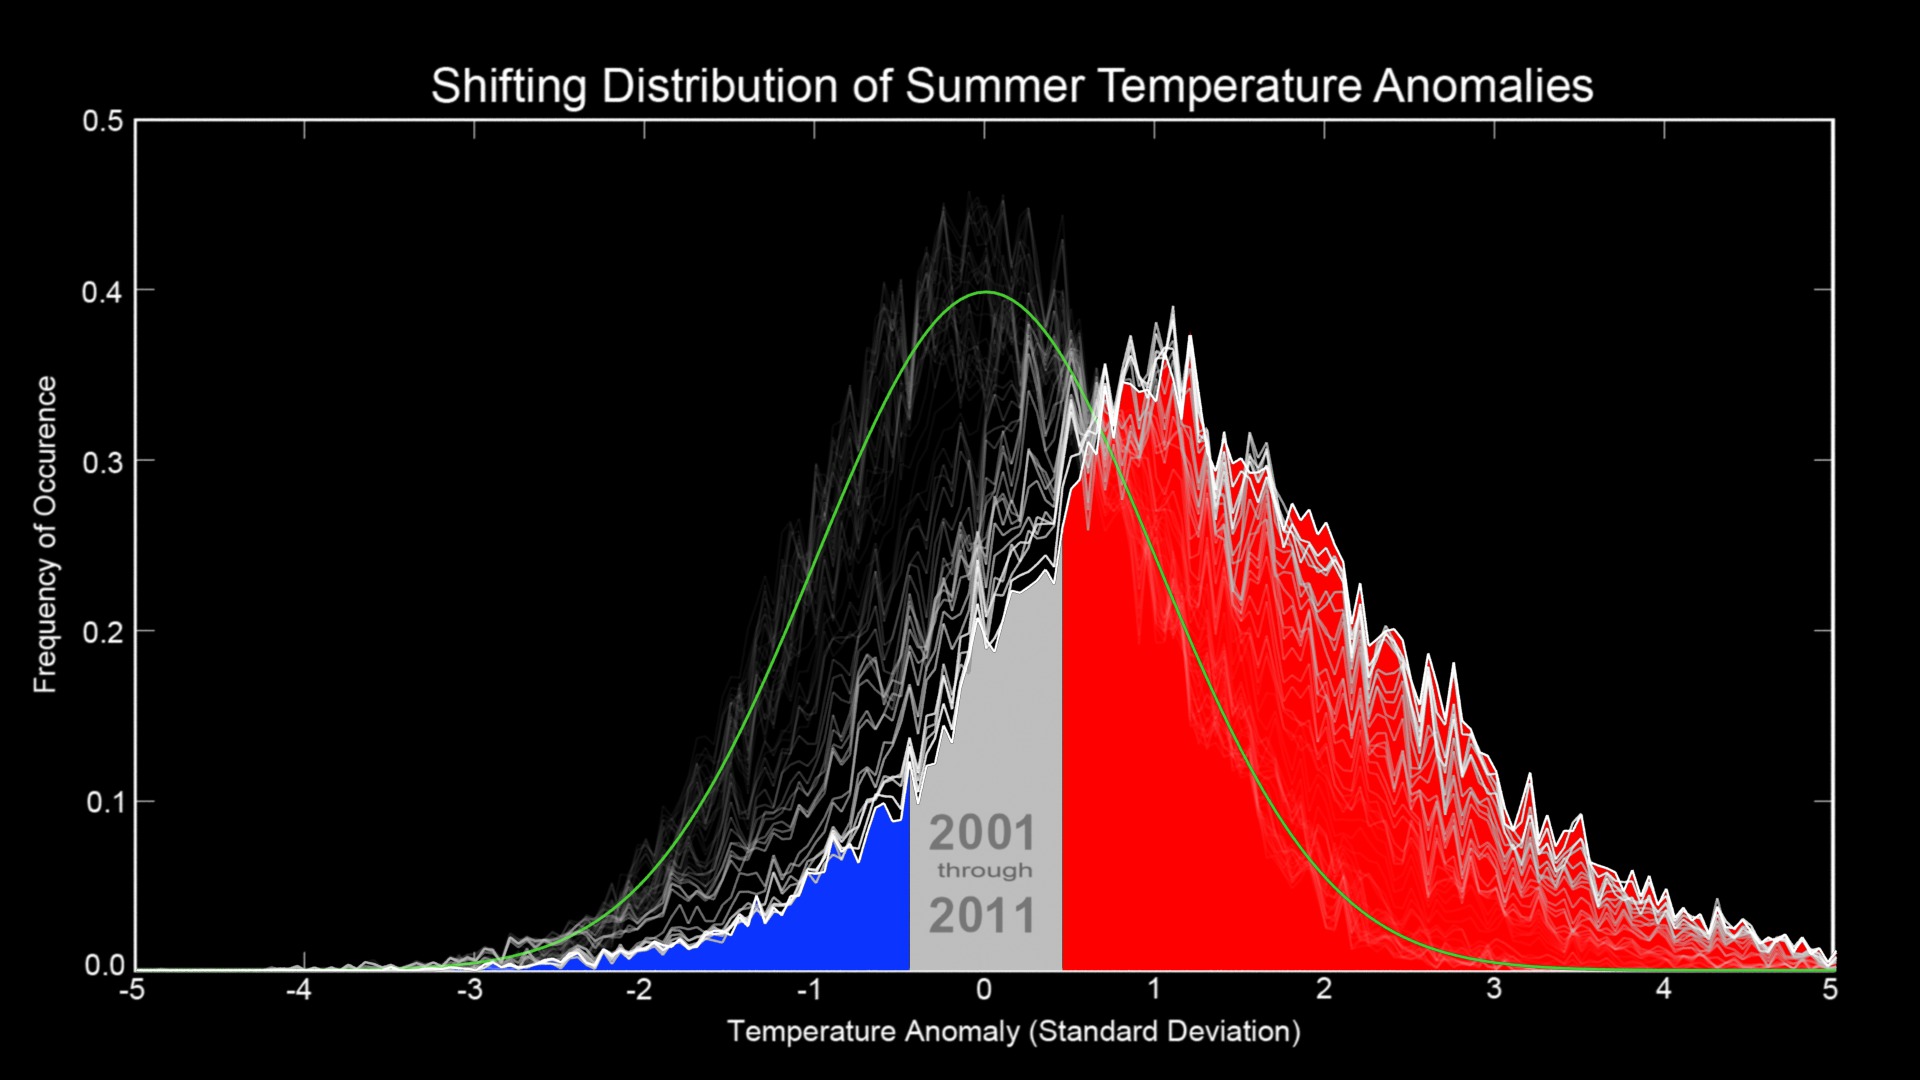 Preview Image for Shifting Distribution of Northern Hemisphere Summer Temperature Anomalies, 1951-2011